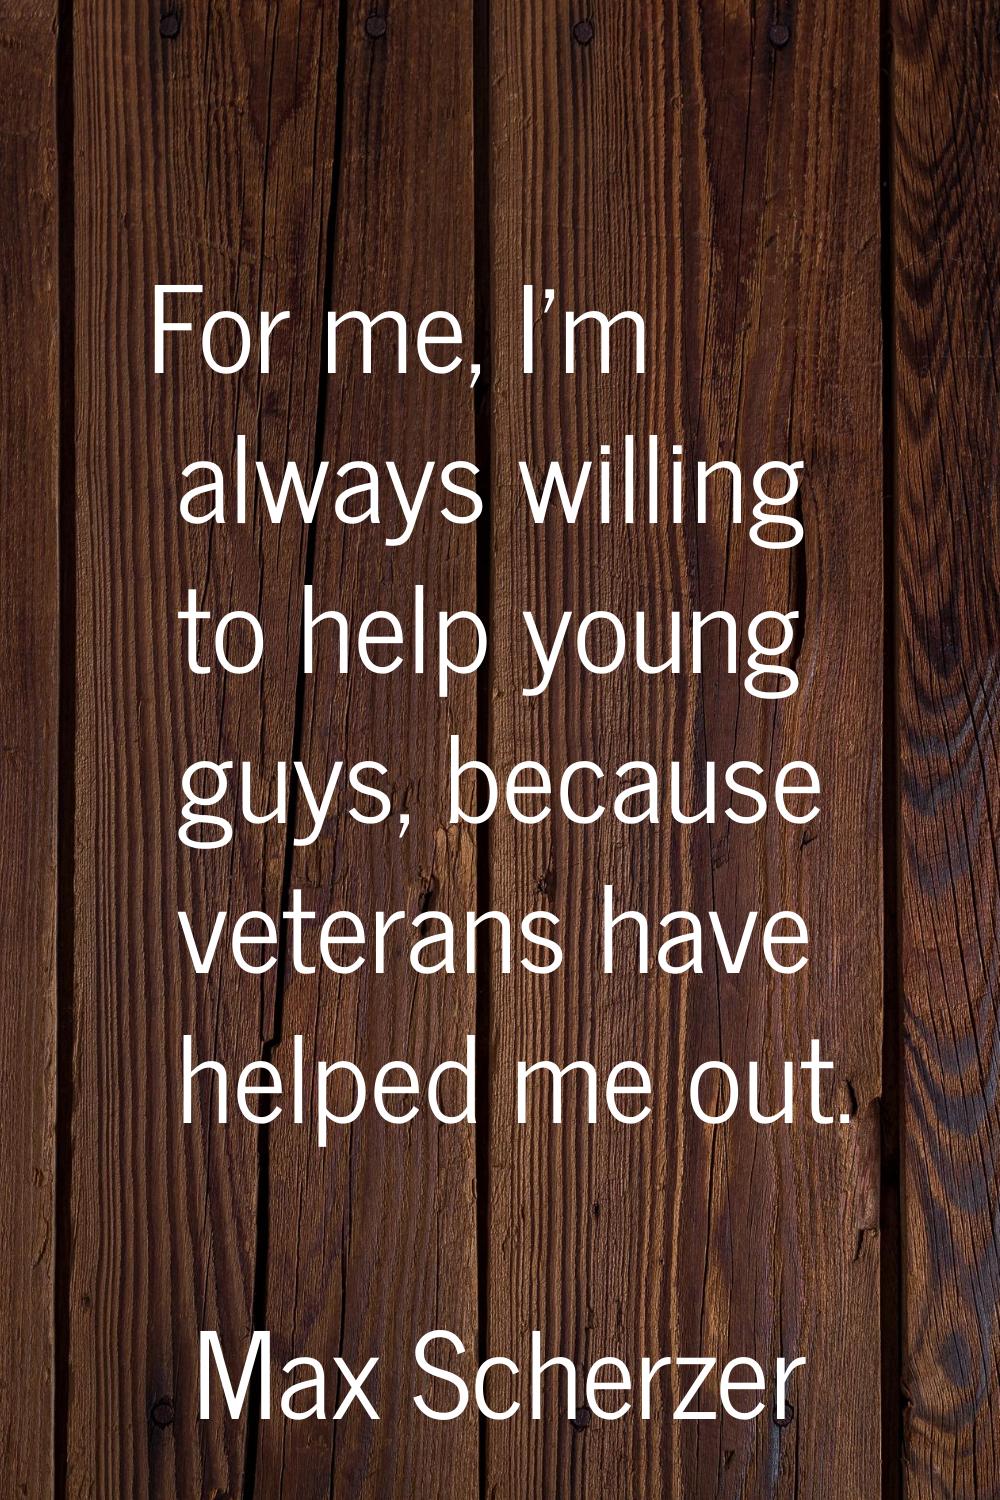 For me, I'm always willing to help young guys, because veterans have helped me out.